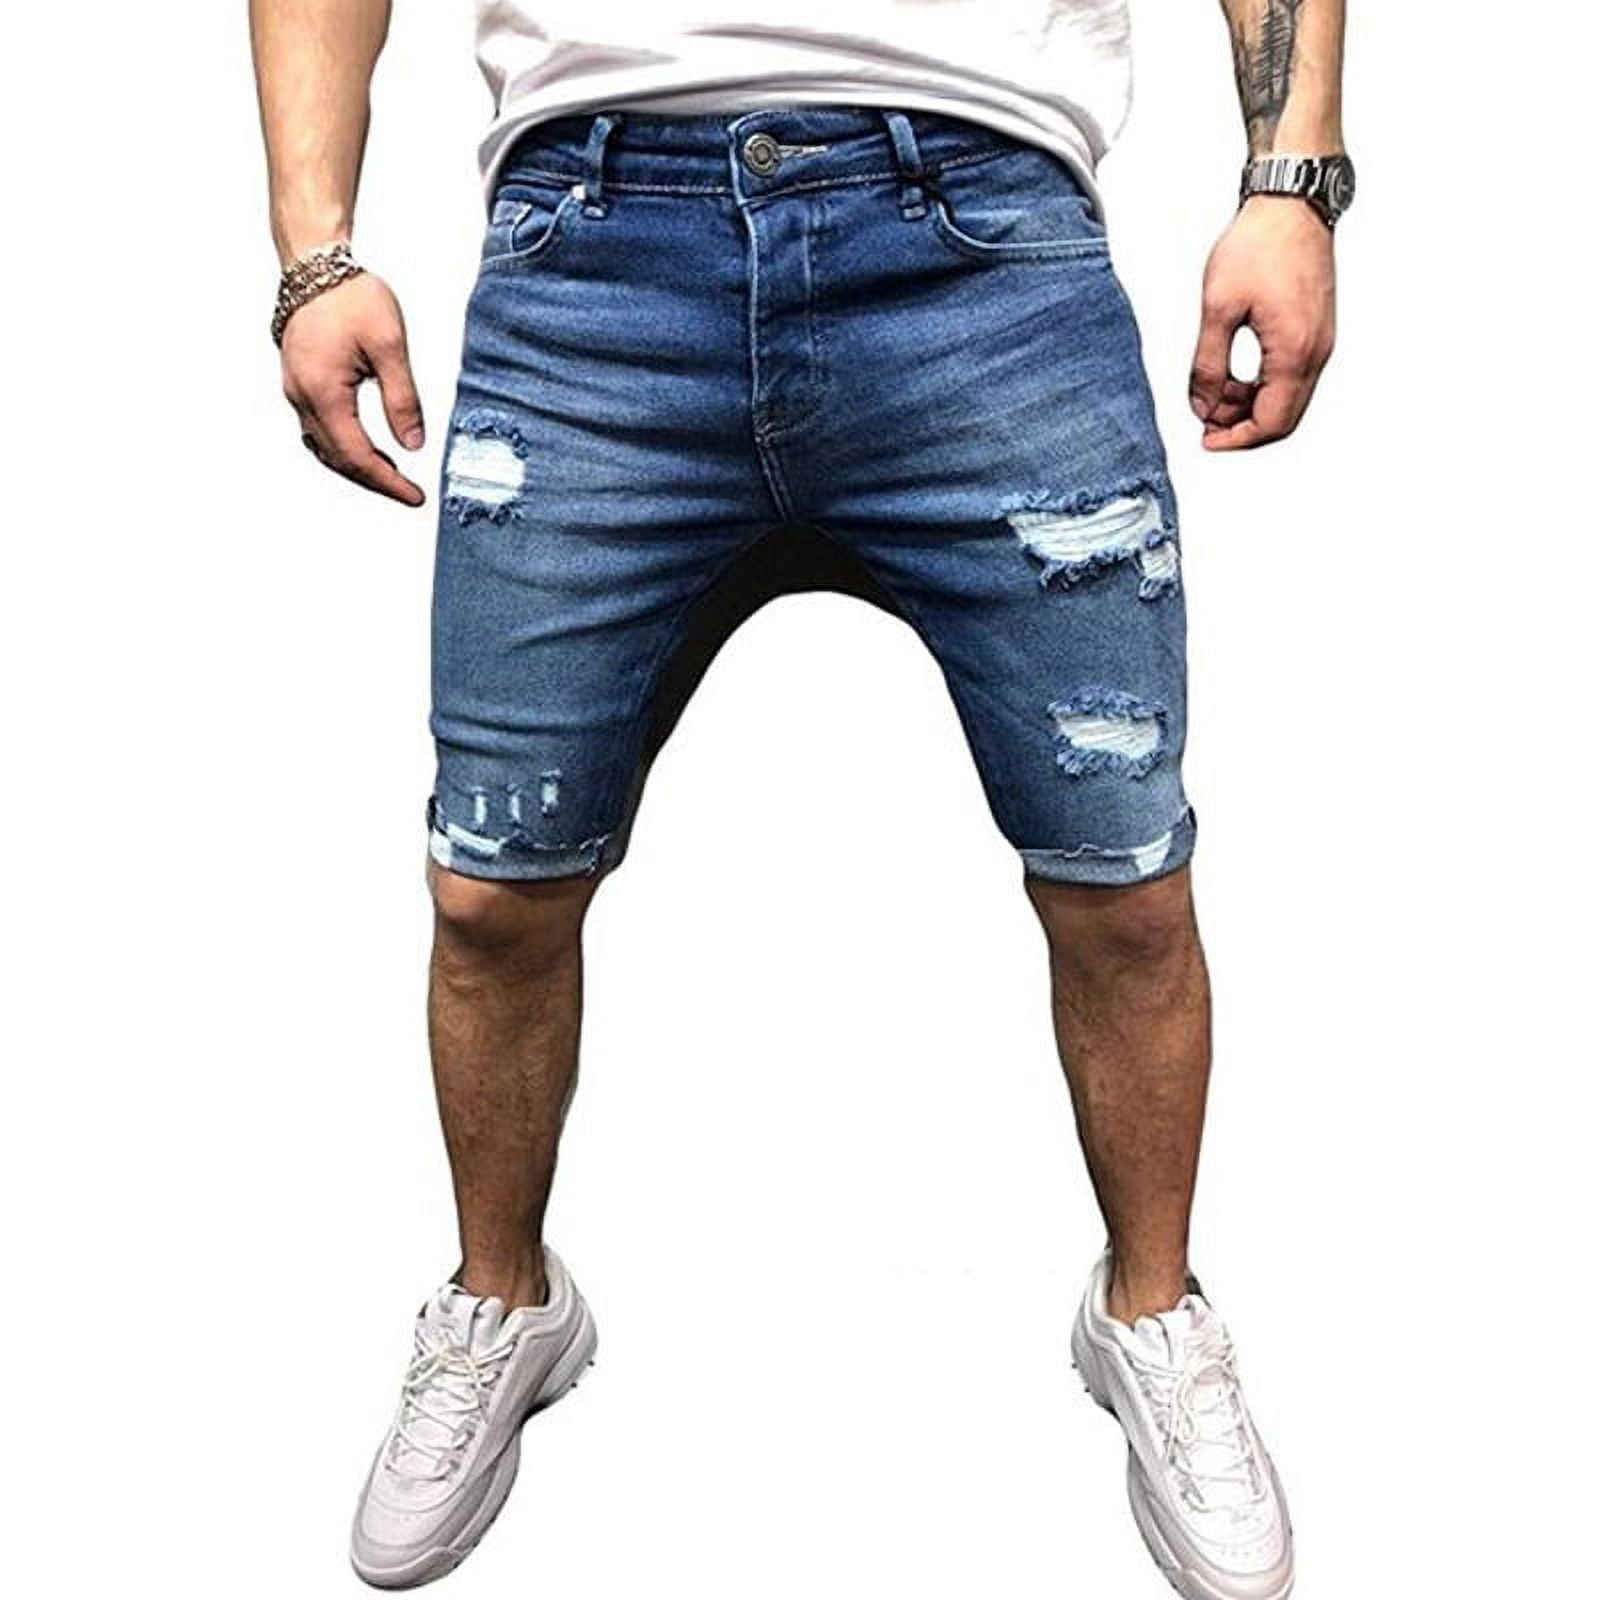 KANY Mens Shorts Casual Fifth Pants Men's Jeans Shorts Ripped Distressed Denim  Shorts with Broken Hole Distressed Stretchy Jeans RippedDark Blue Size M -  Walmart.com